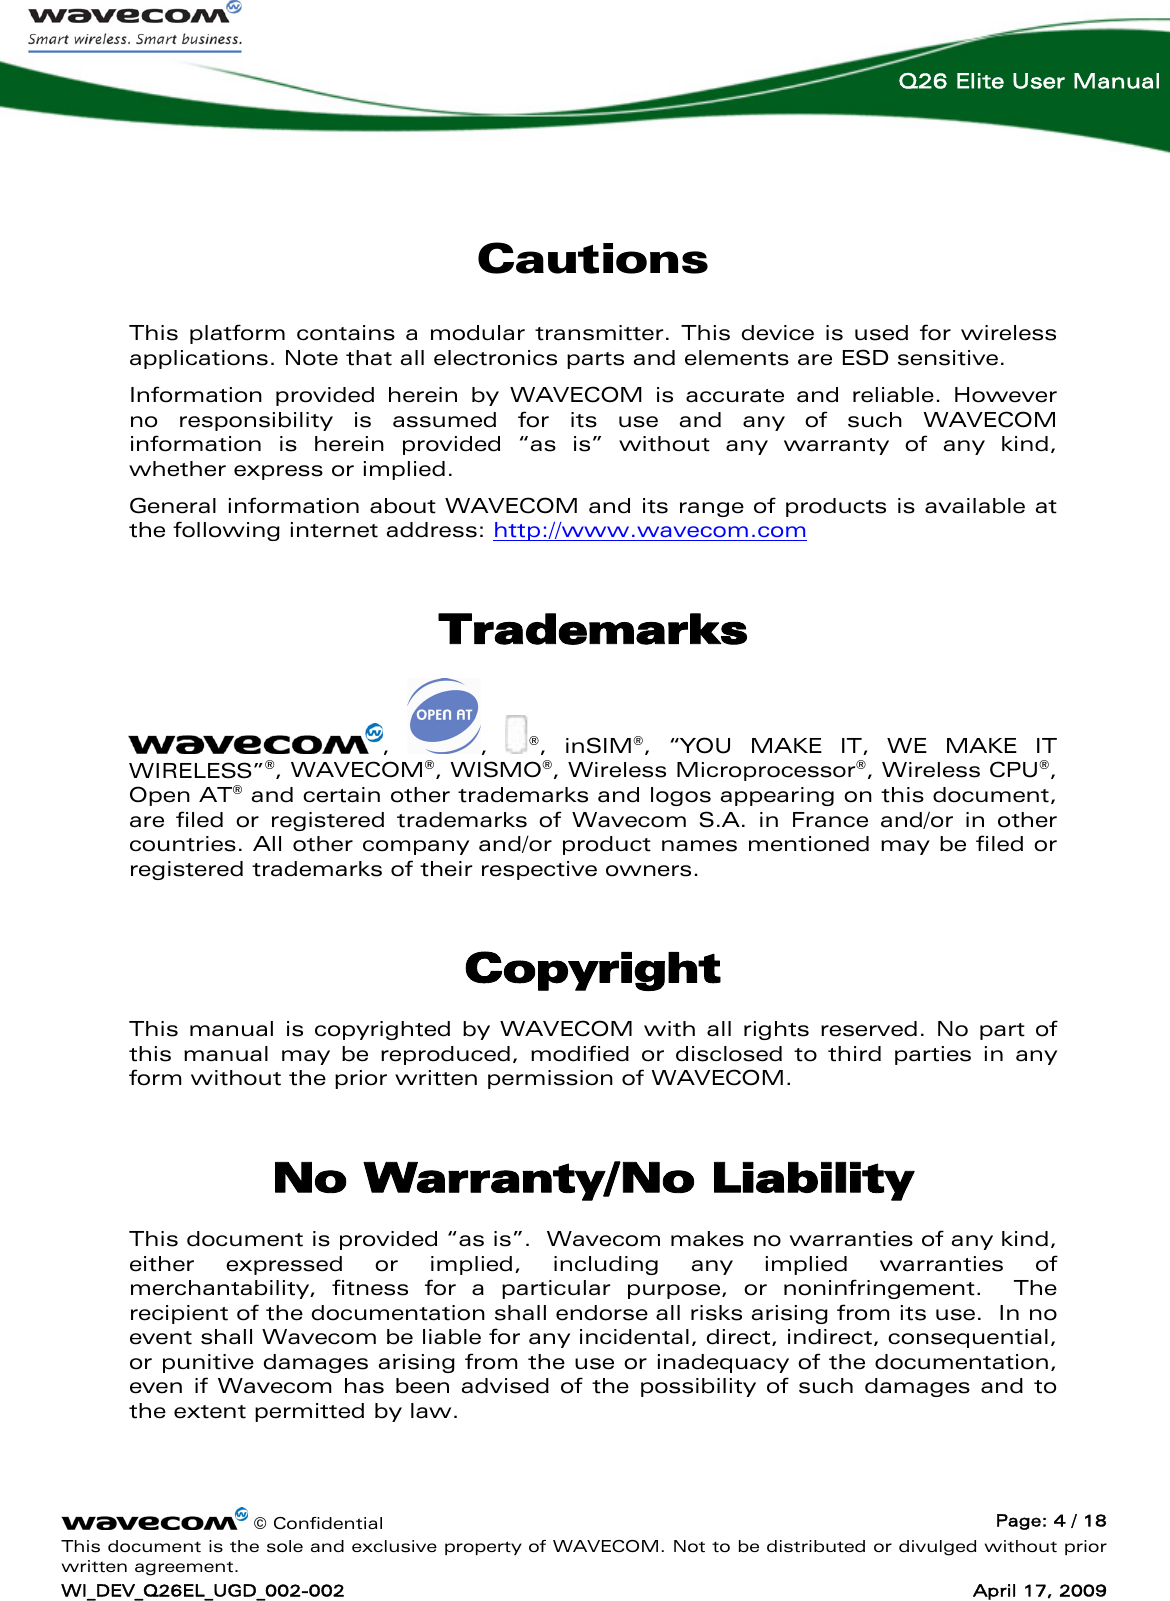    © Confidential  Page: 4 / 18 This document is the sole and exclusive property of WAVECOM. Not to be distributed or divulged without prior written agreement. WI_DEV_Q26EL_UGD_002-002  April 17, 2009  Q26 Elite User Manual Cautions This platform contains a modular transmitter. This device is used for wireless applications. Note that all electronics parts and elements are ESD sensitive. Information provided herein by WAVECOM is accurate and reliable. However no responsibility is assumed for its use and any of such WAVECOM information is herein provided “as is” without any warranty of any kind, whether express or implied. General information about WAVECOM and its range of products is available at the following internet address: http://www.wavecom.com Trademarks ,  ,  ®, inSIM®, “YOU MAKE IT, WE MAKE IT WIRELESS”®, WAVECOM®, WISMO®, Wireless Microprocessor®, Wireless CPU®, Open AT® and certain other trademarks and logos appearing on this document, are filed or registered trademarks of Wavecom S.A. in France and/or in other countries. All other company and/or product names mentioned may be filed or registered trademarks of their respective owners.  Copyright This manual is copyrighted by WAVECOM with all rights reserved. No part of this manual may be reproduced, modified or disclosed to third parties in any form without the prior written permission of WAVECOM.  No Warranty/No Liability This document is provided “as is”.  Wavecom makes no warranties of any kind, either expressed or implied, including any implied warranties of merchantability, fitness for a particular purpose, or noninfringement.  The recipient of the documentation shall endorse all risks arising from its use.  In no event shall Wavecom be liable for any incidental, direct, indirect, consequential, or punitive damages arising from the use or inadequacy of the documentation, even if Wavecom has been advised of the possibility of such damages and to the extent permitted by law. 